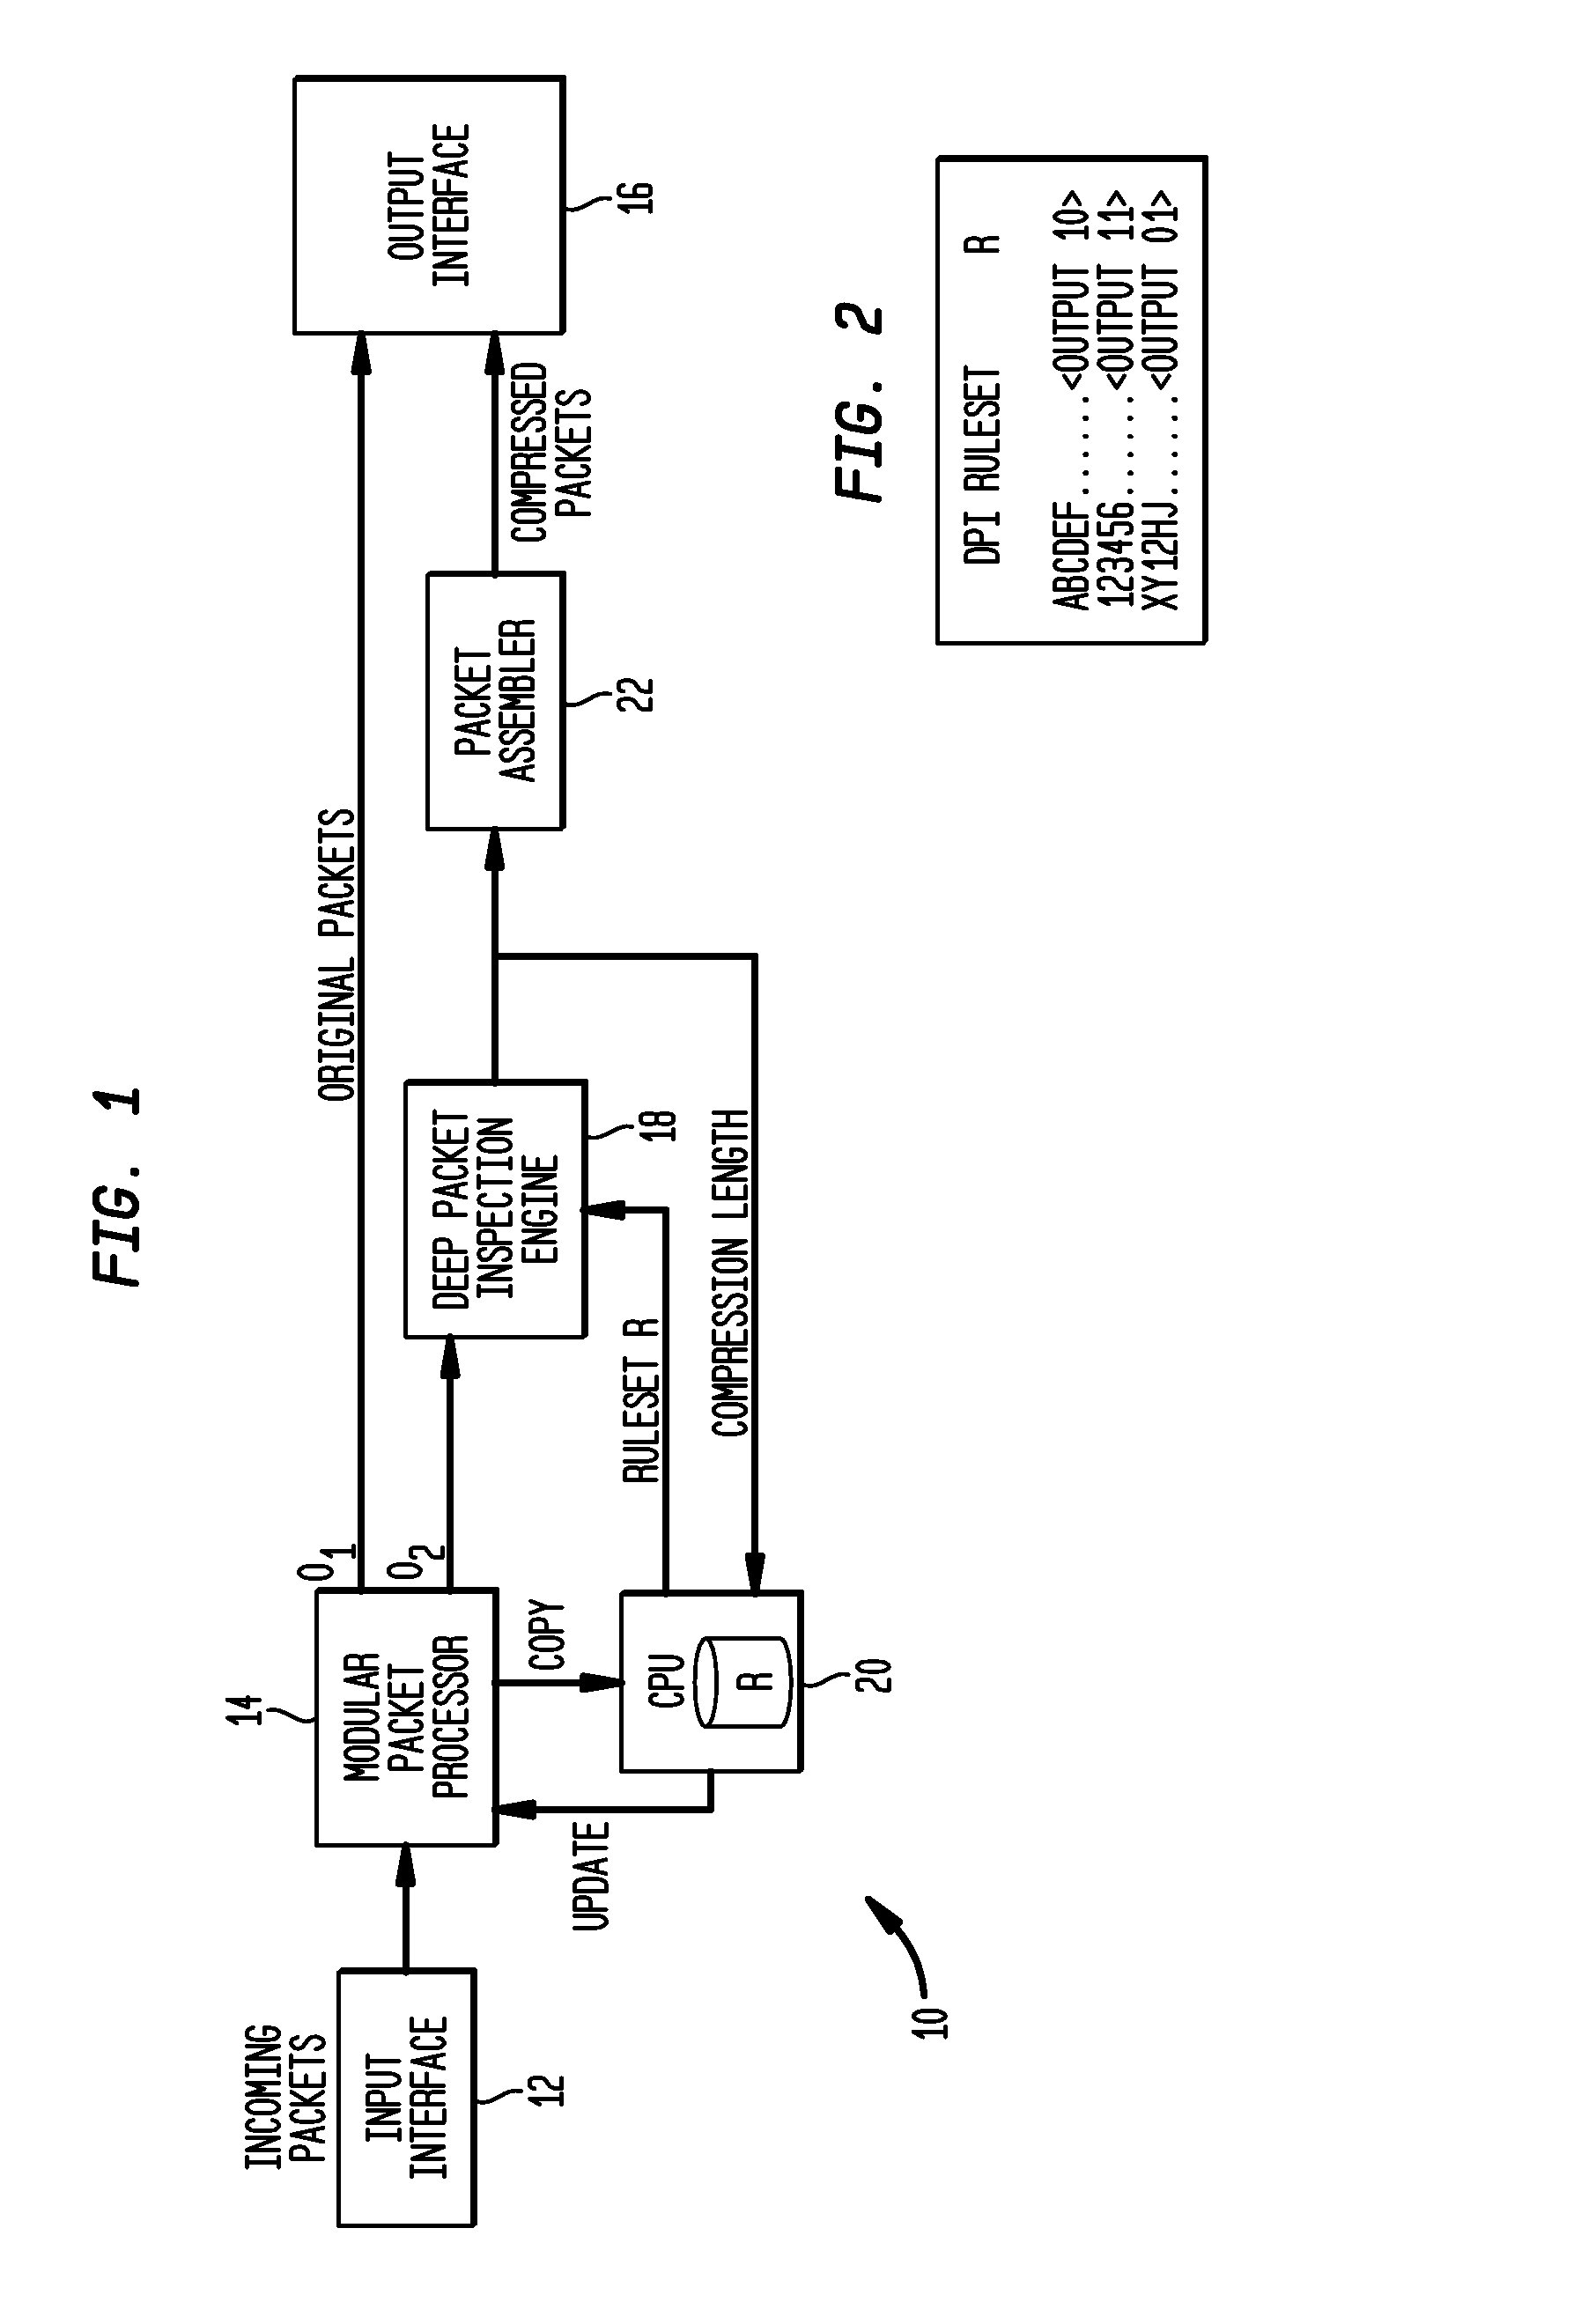 Low latency in-line data compression for packet transmission systems